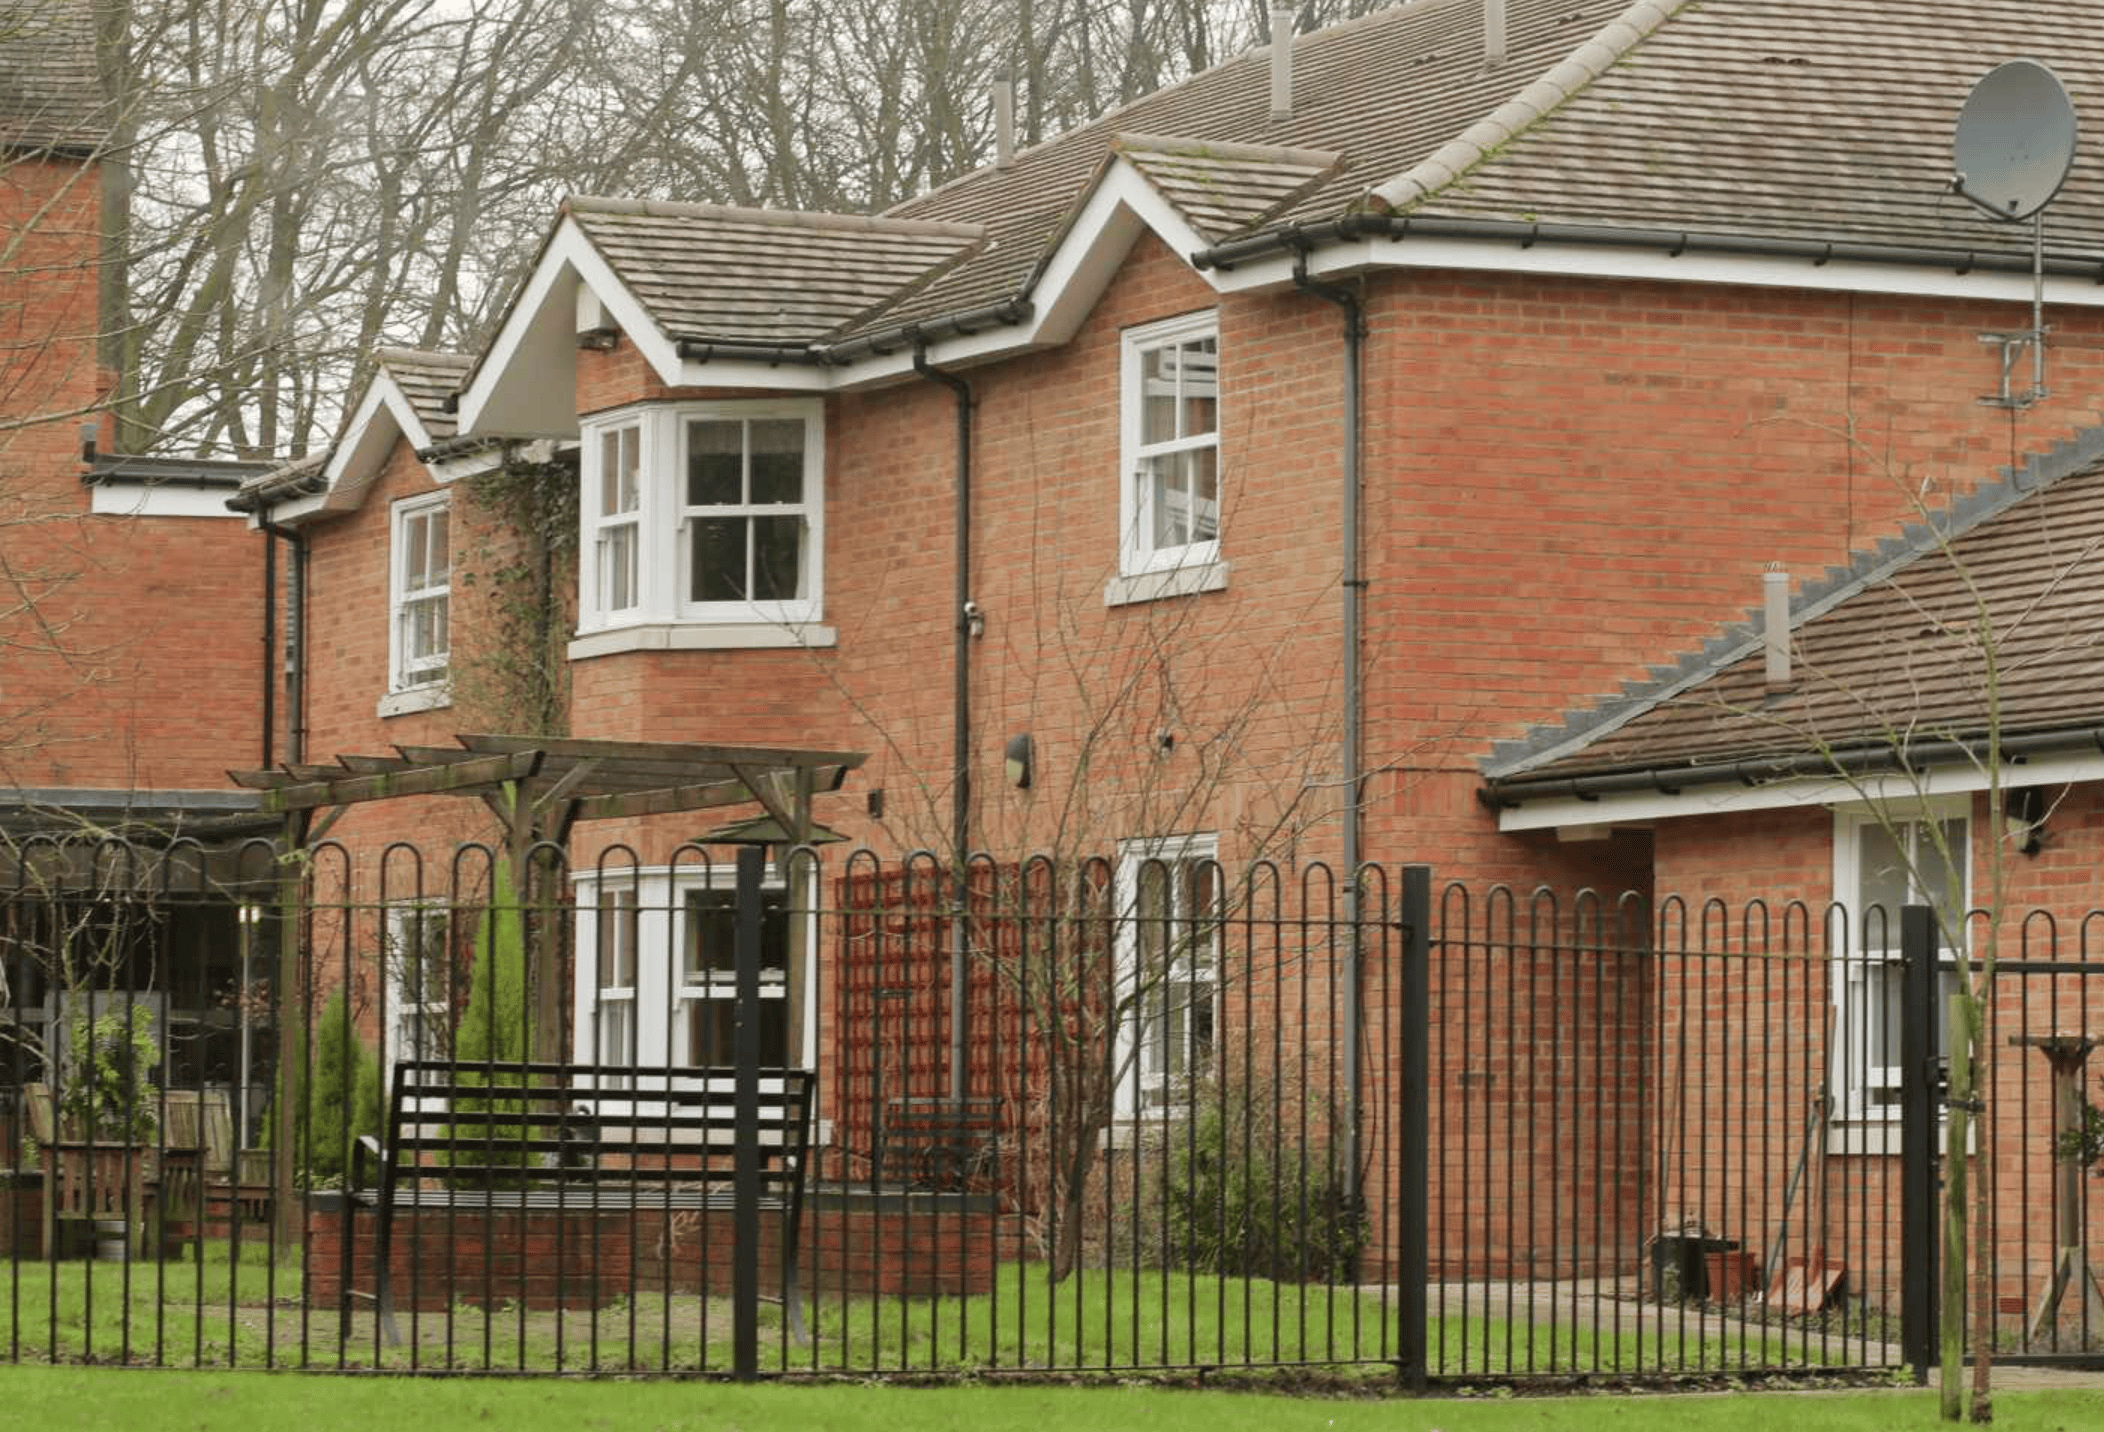 Exterior of Pelsall Hall in Walsall, West Midlands